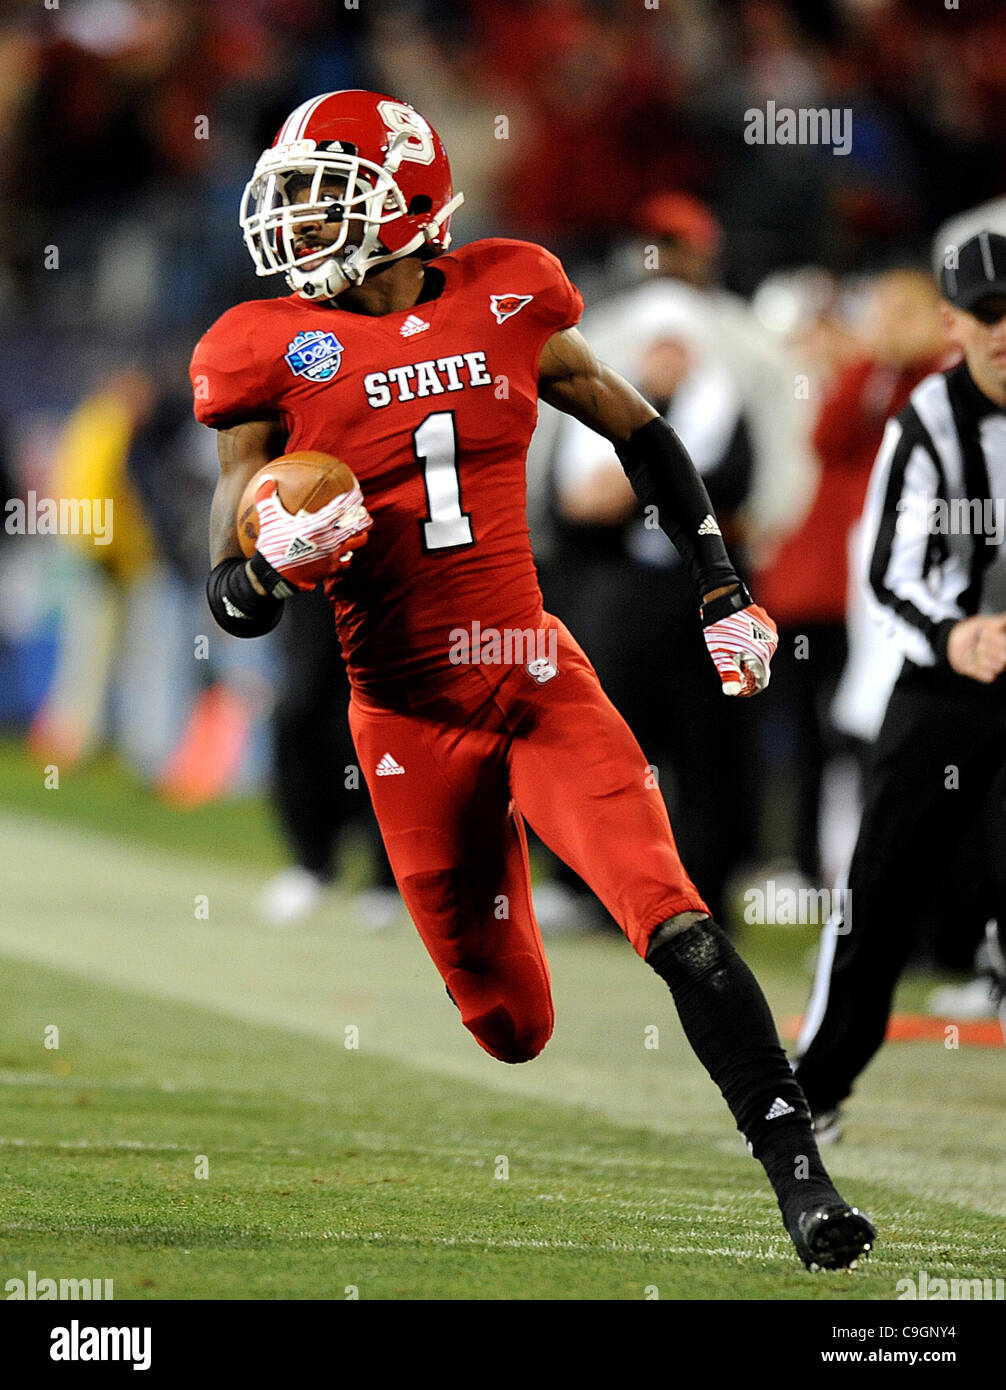 Dec.27, 2011 - Charlotte, North Carolina; USA -  North Carolina State Wolfpack (1) DAVID AMERSON runs for a touchdown as the North Carolina State Wolfpack compete against The University of Louisville Cardinals in the Belk Bowl College Football game that took place at the Bank of America Stadium.  Co Stock Photo